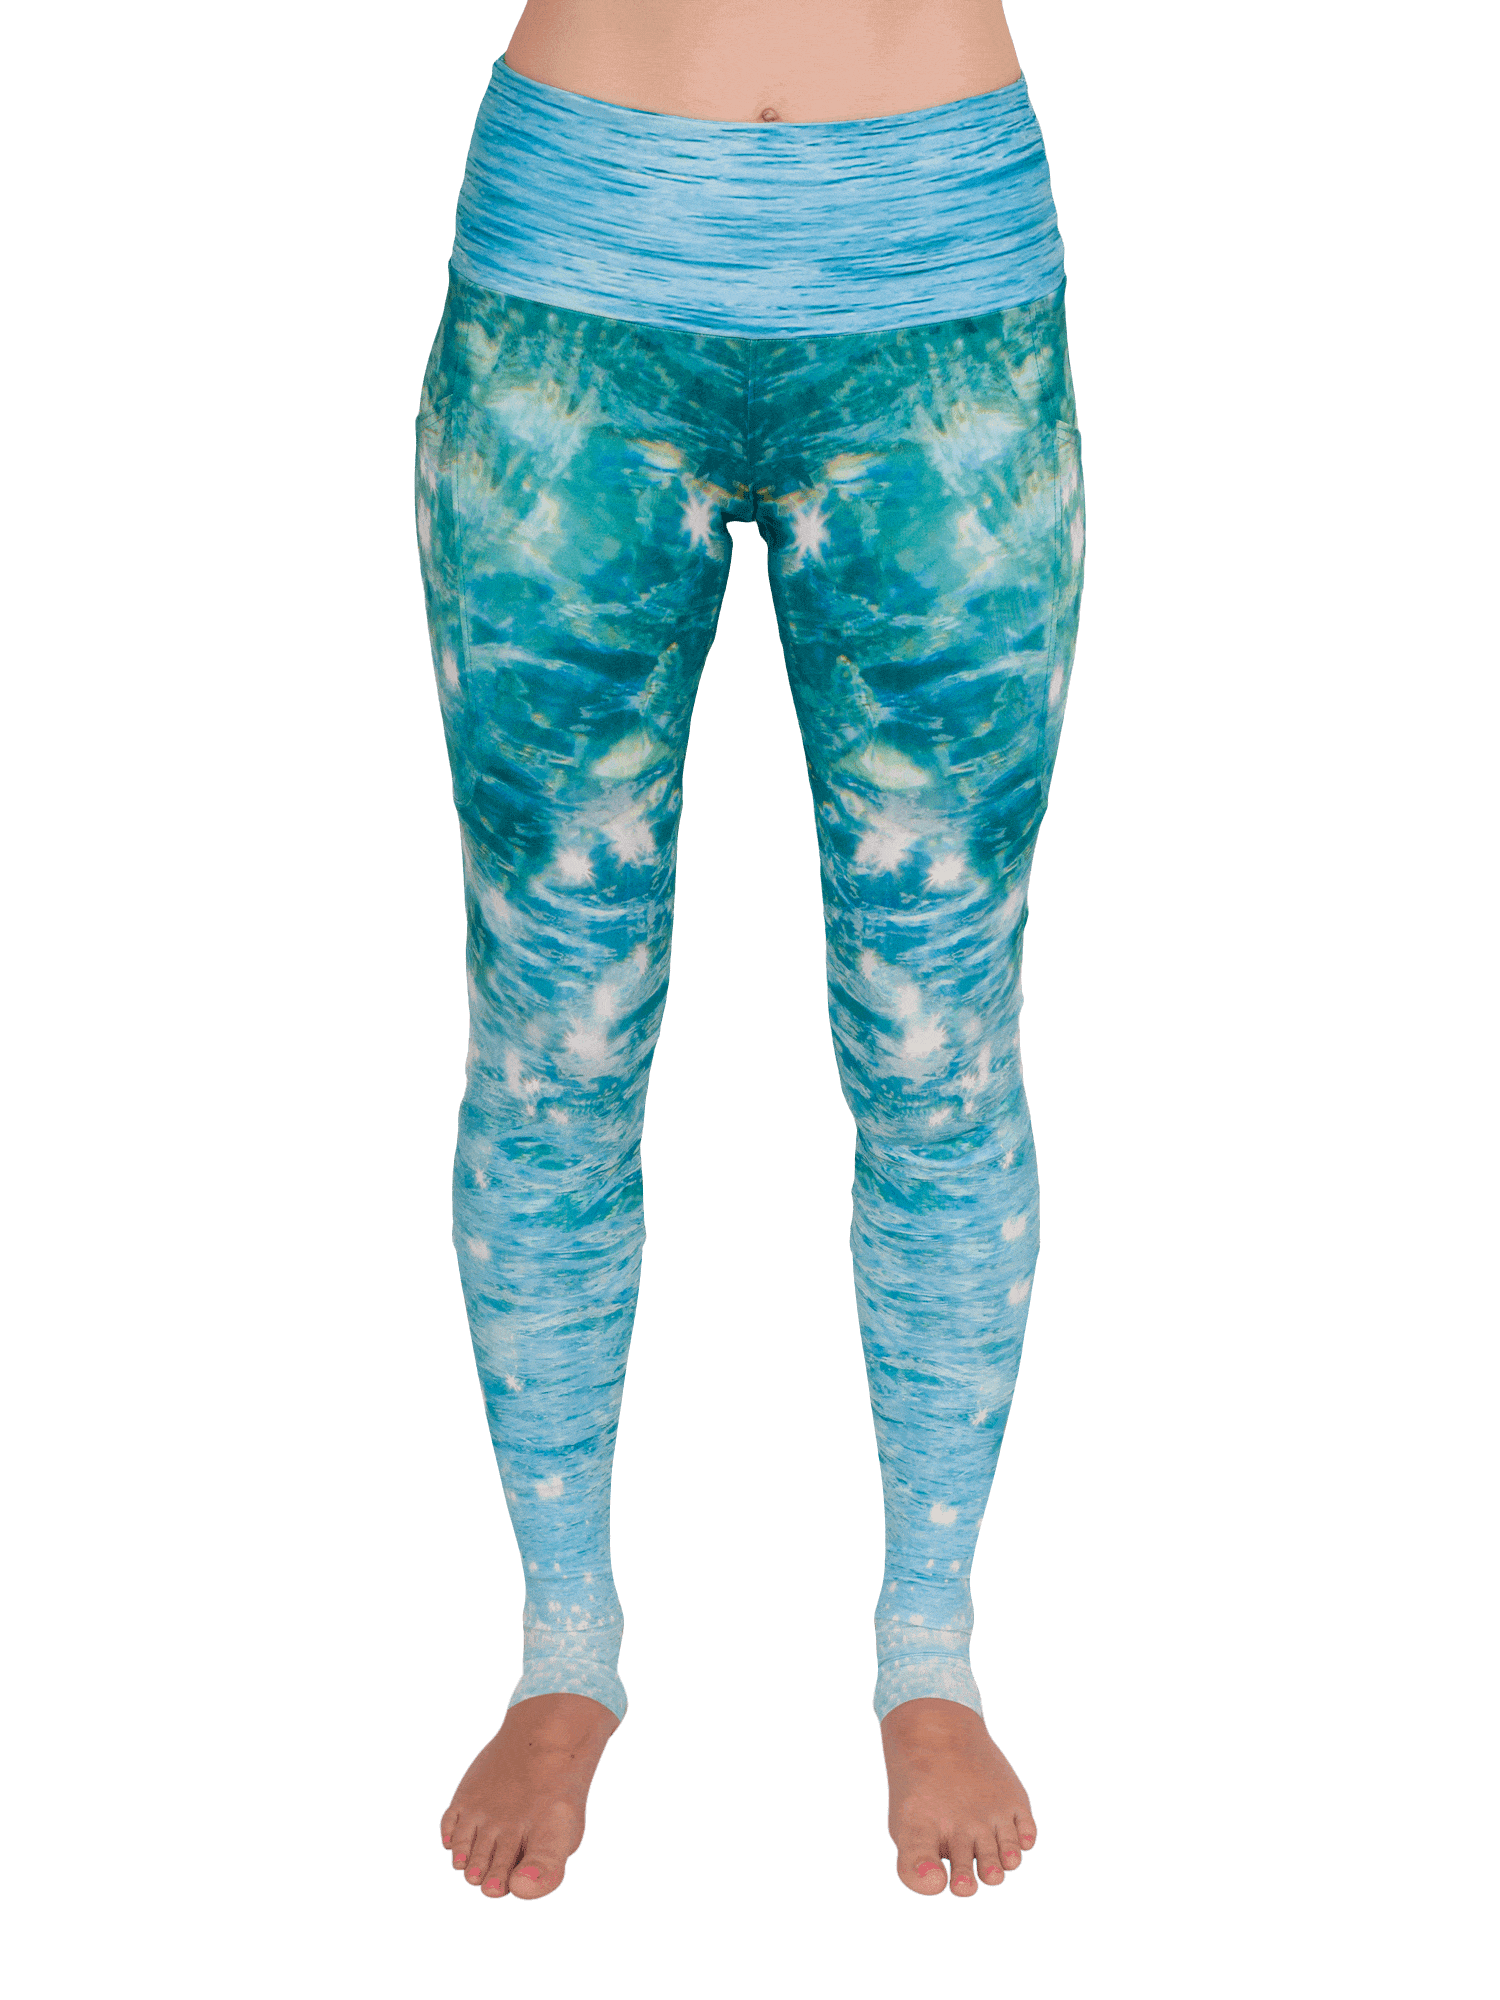 These Swim Leggings Look Cool But Will Keep You Warm In The Water - Yahoo  Sports